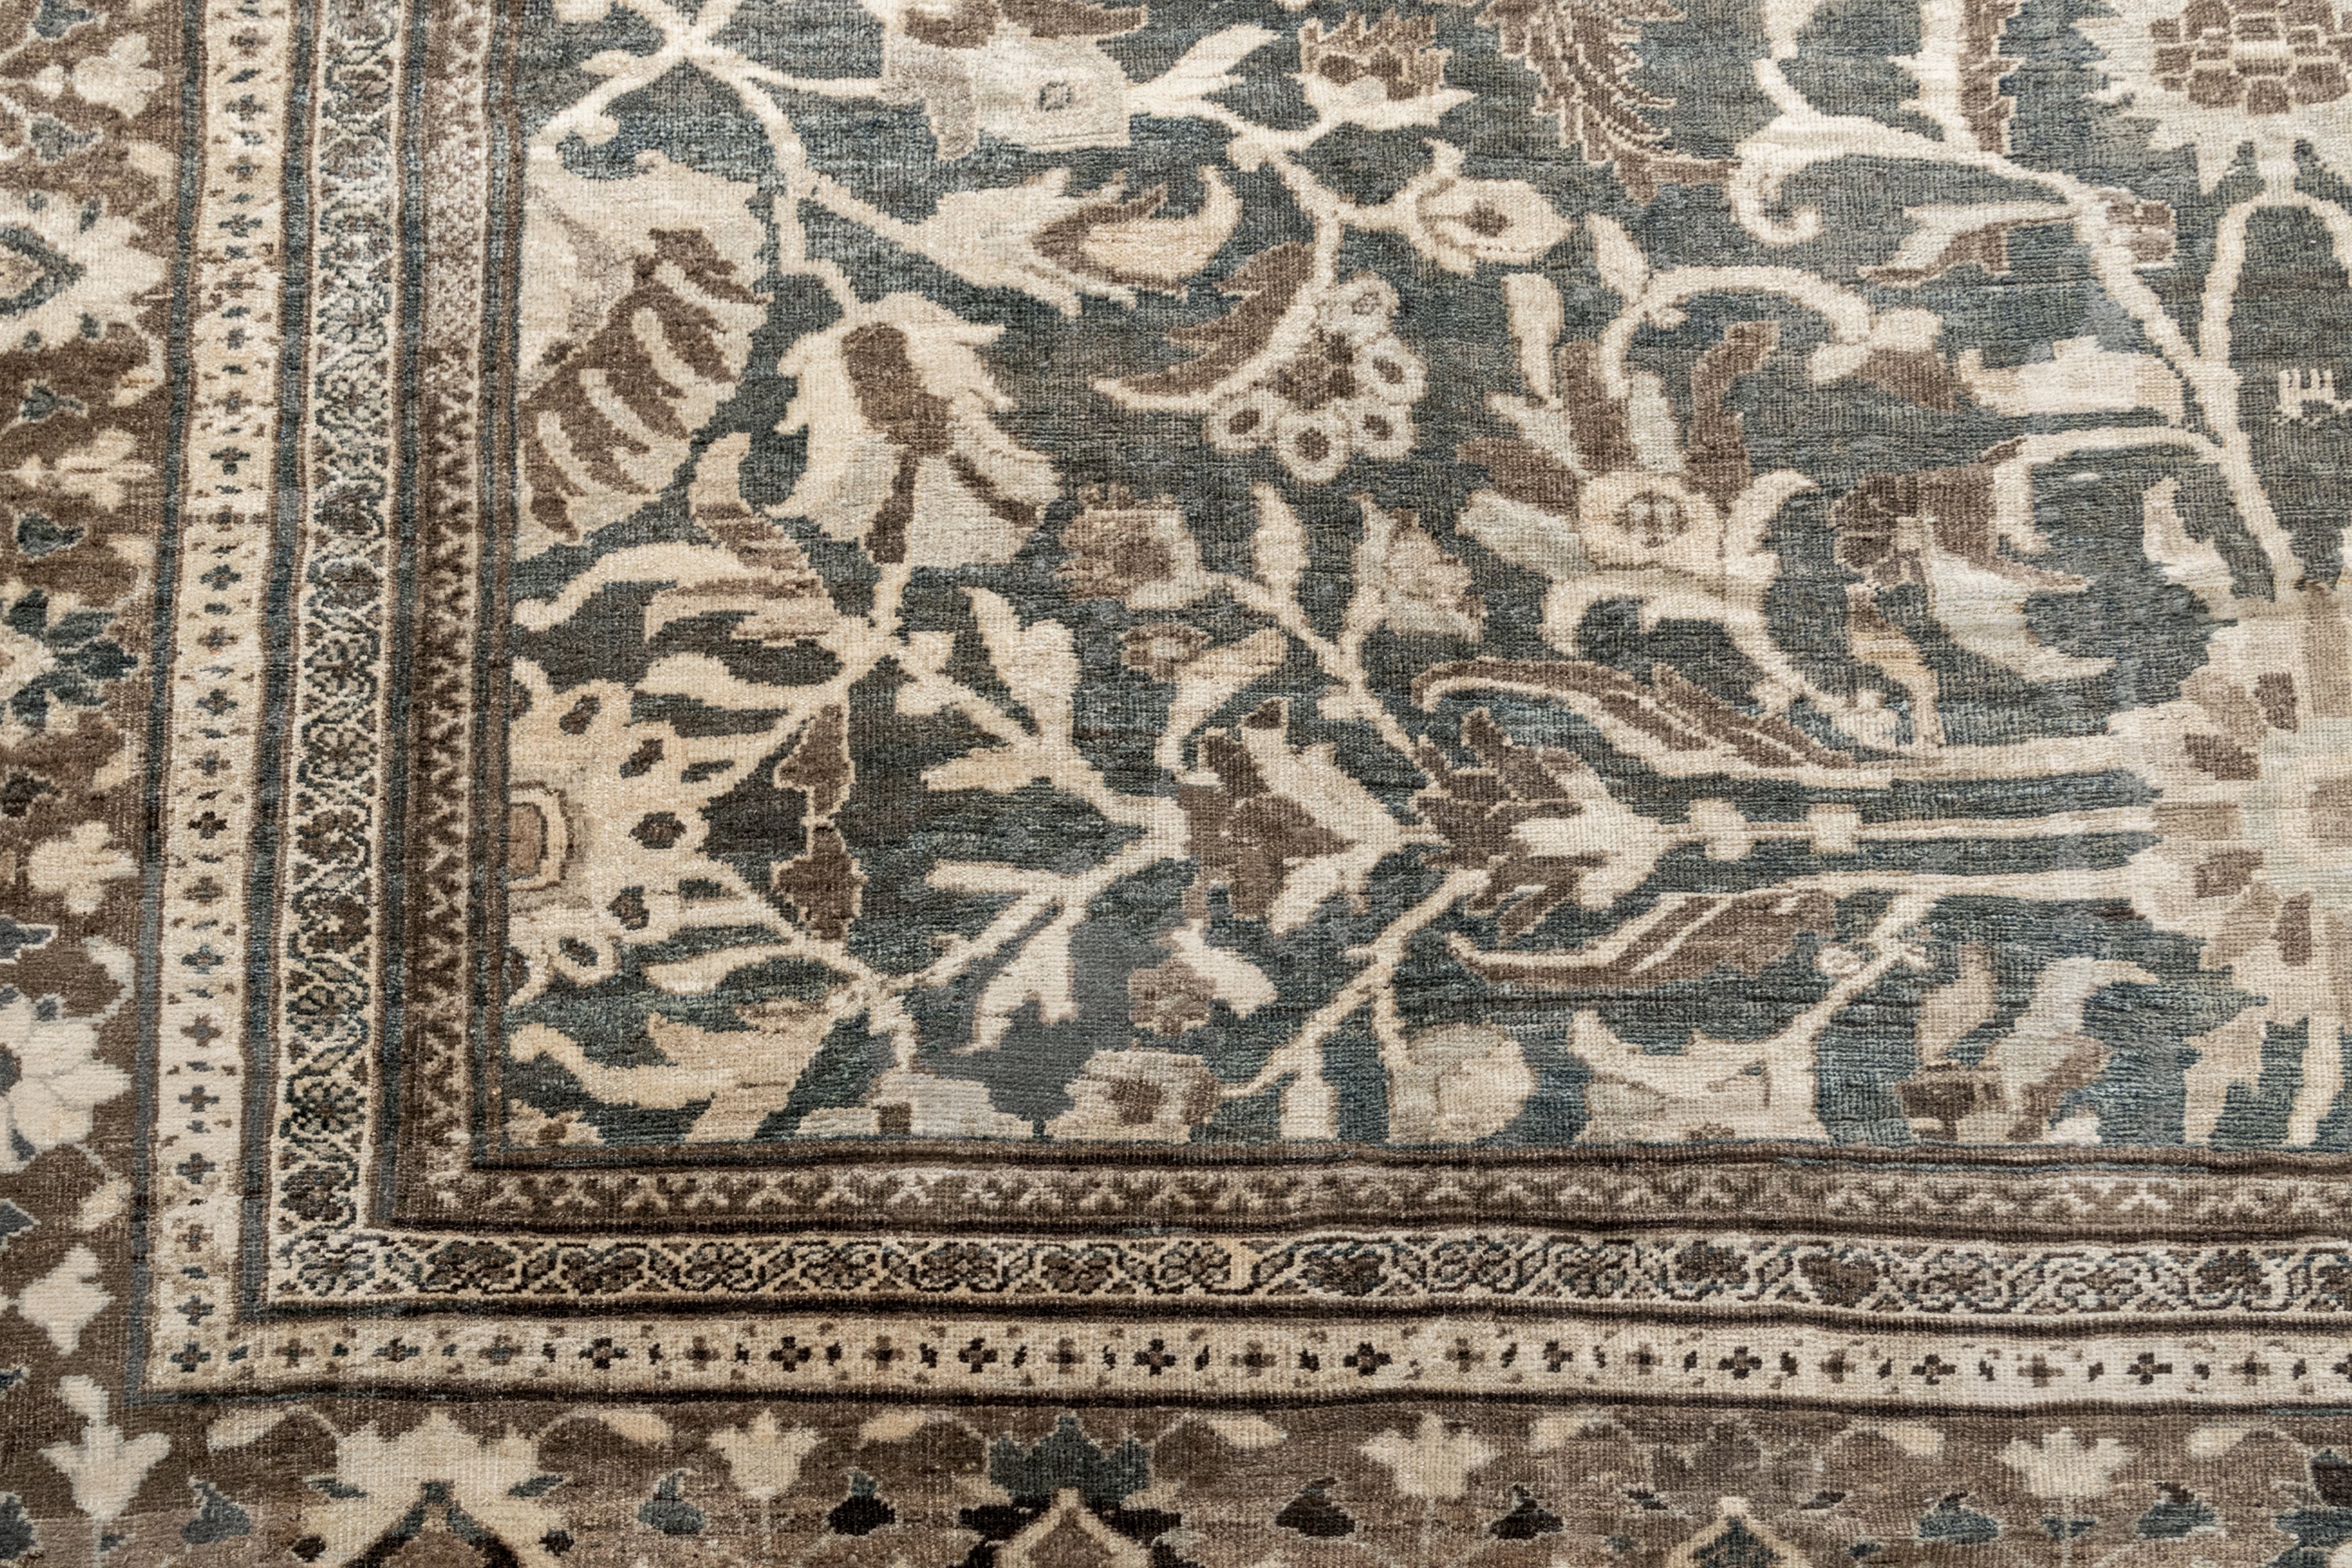 SULTANABAD RUG, AR31074/6739, WEST PERSIA, 13'10" X 19'9" - thumbnail 11